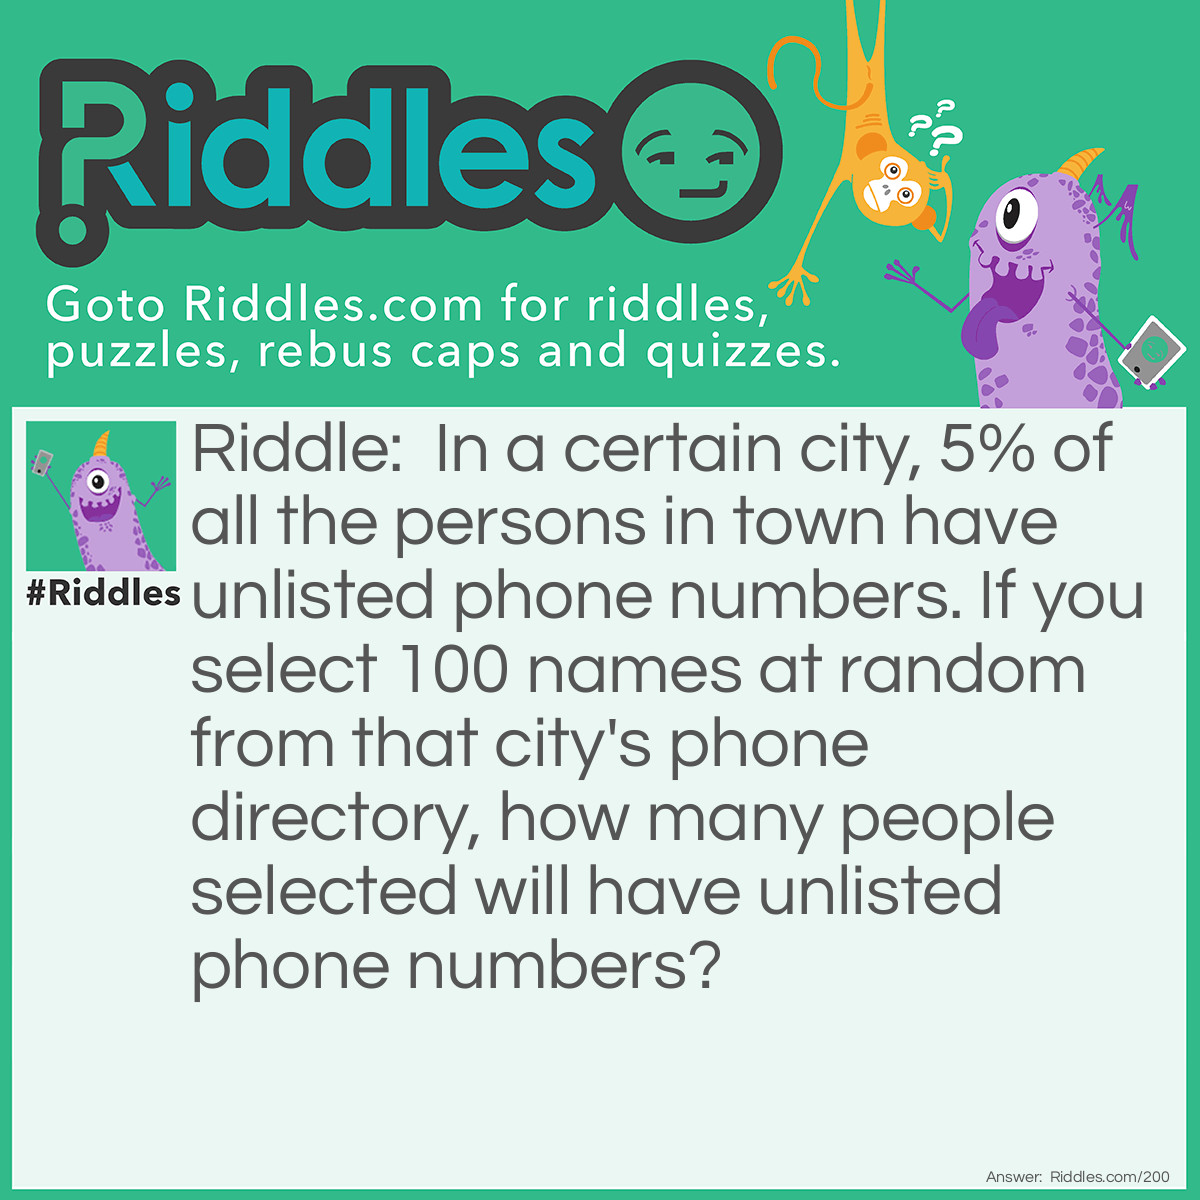 Riddle: In a certain city, 5% of all the people in town have unlisted phone numbers. If you select 100 names at random from that city's phone directory, how many people selected will have unlisted phone numbers? Answer: None. If their names are in the phone directory, they do not have unlisted phone numbers!